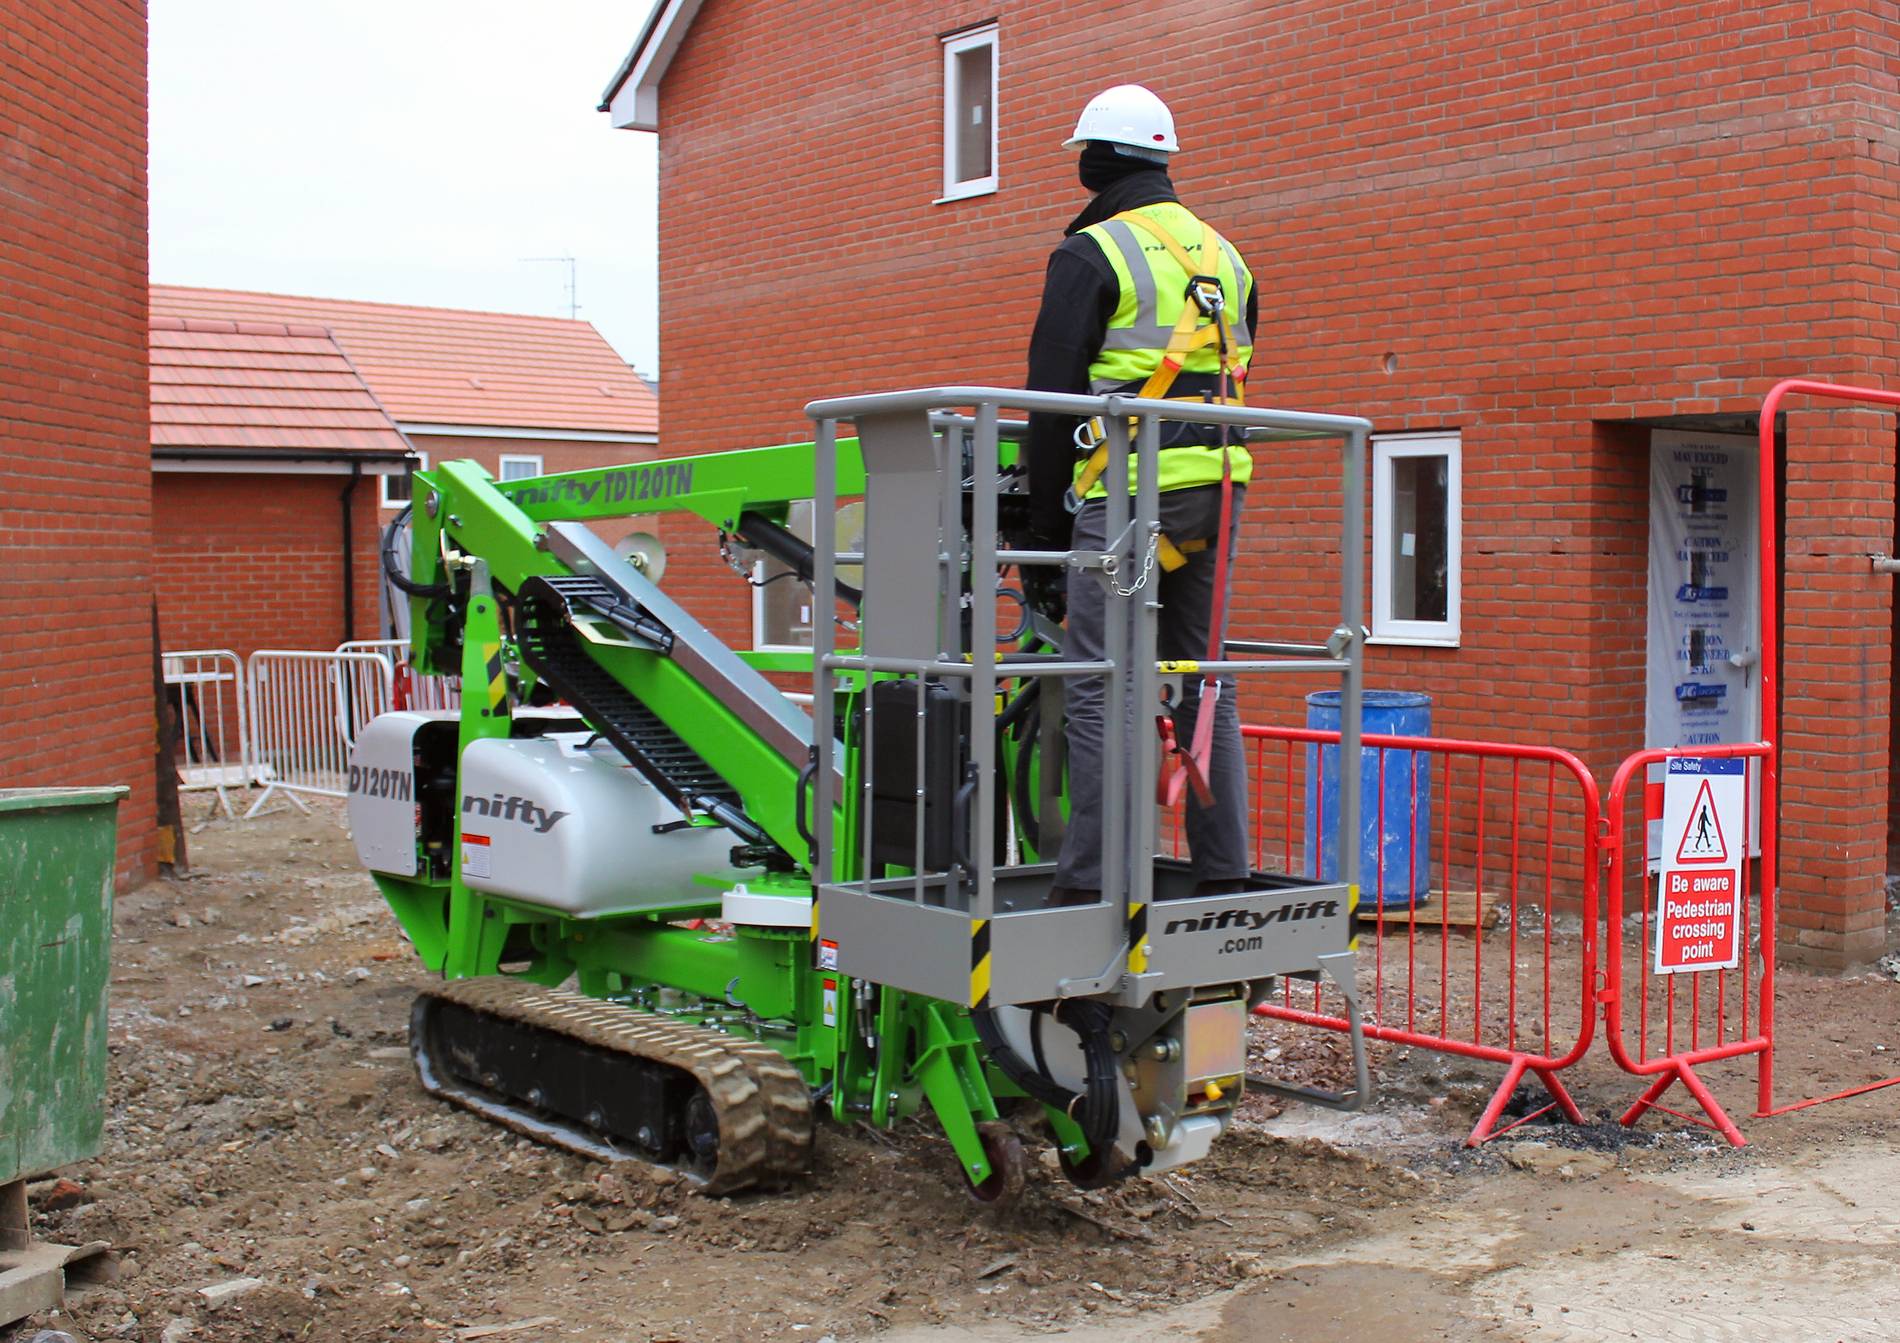 An image of Powered access platform hire in South Wales & Western England goes here.